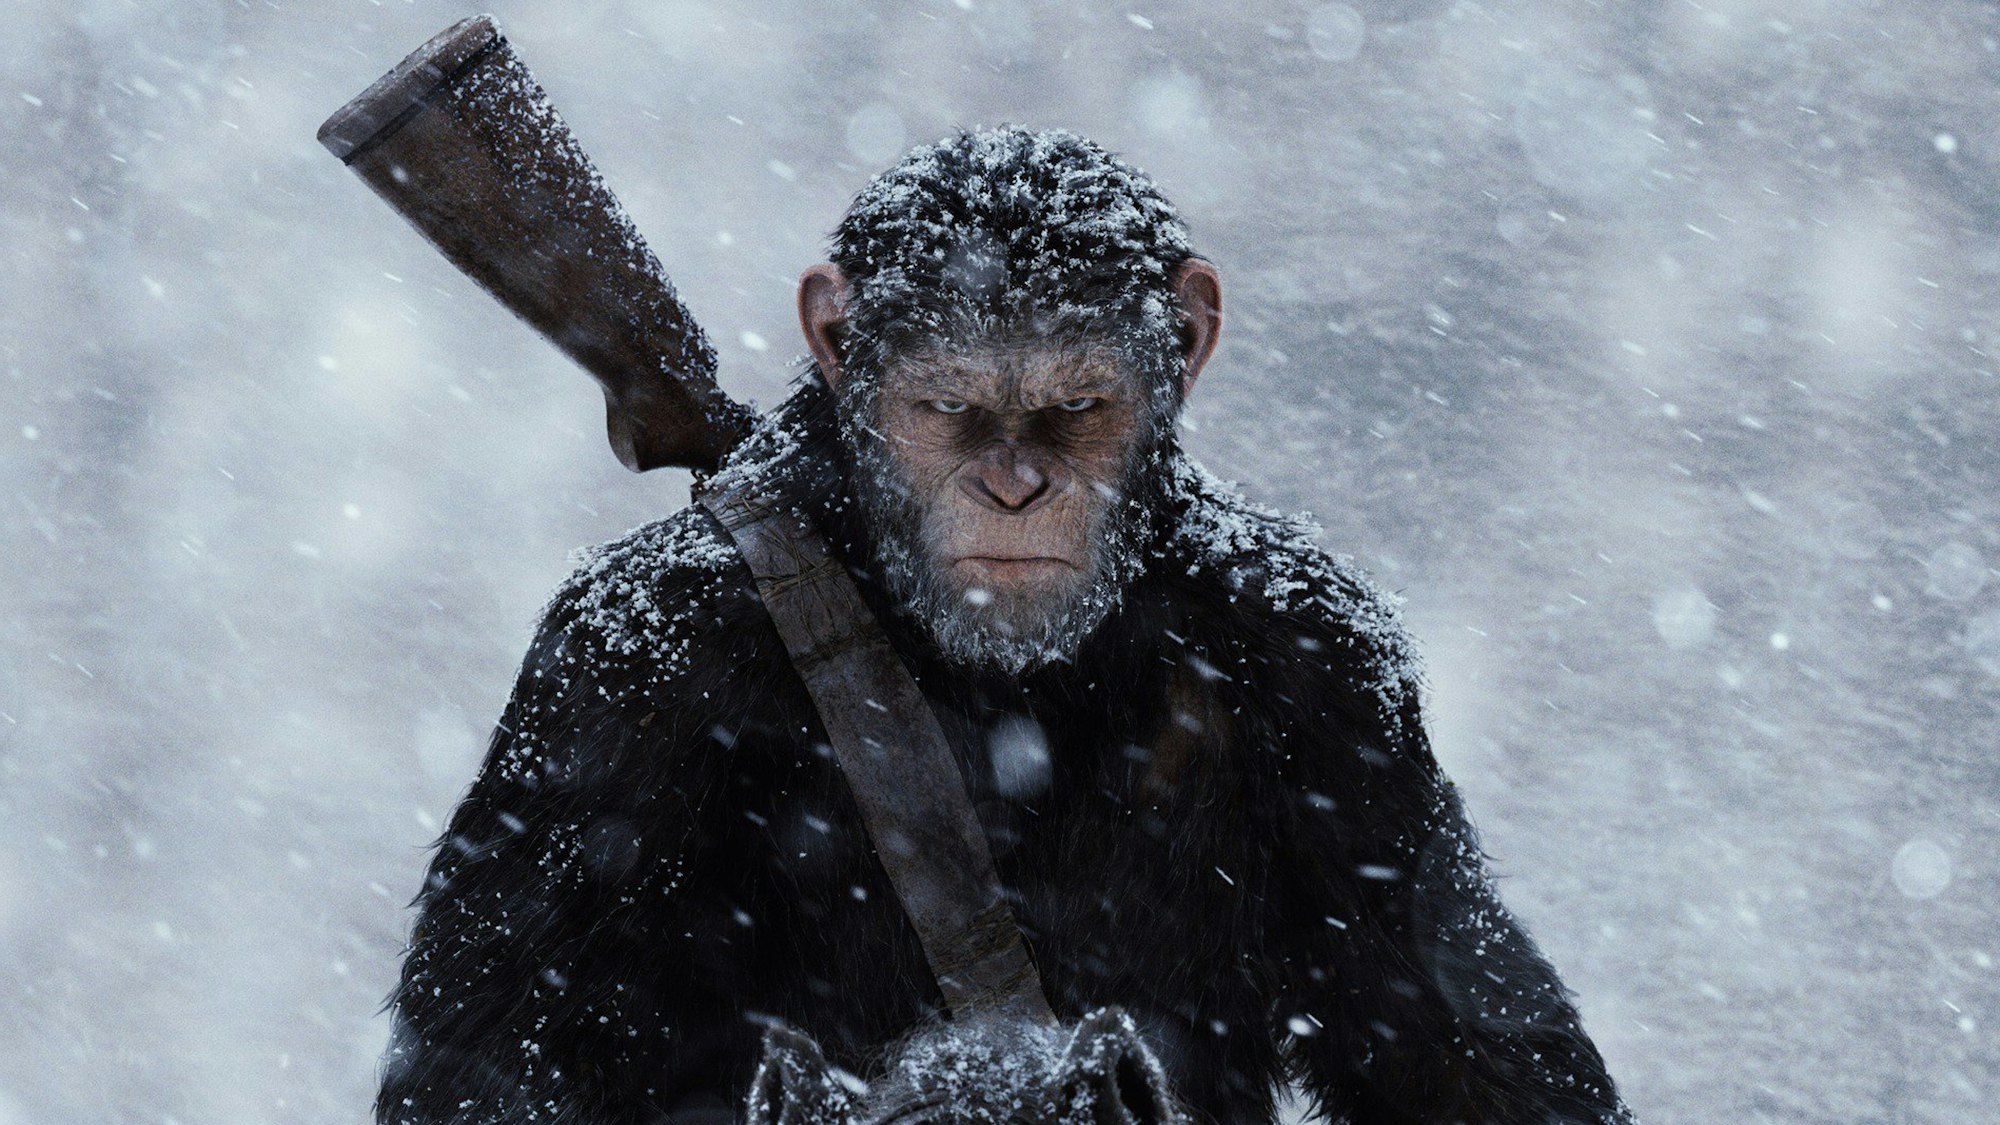 of the Apes 4' release date, trailer, cast & more about the sequel